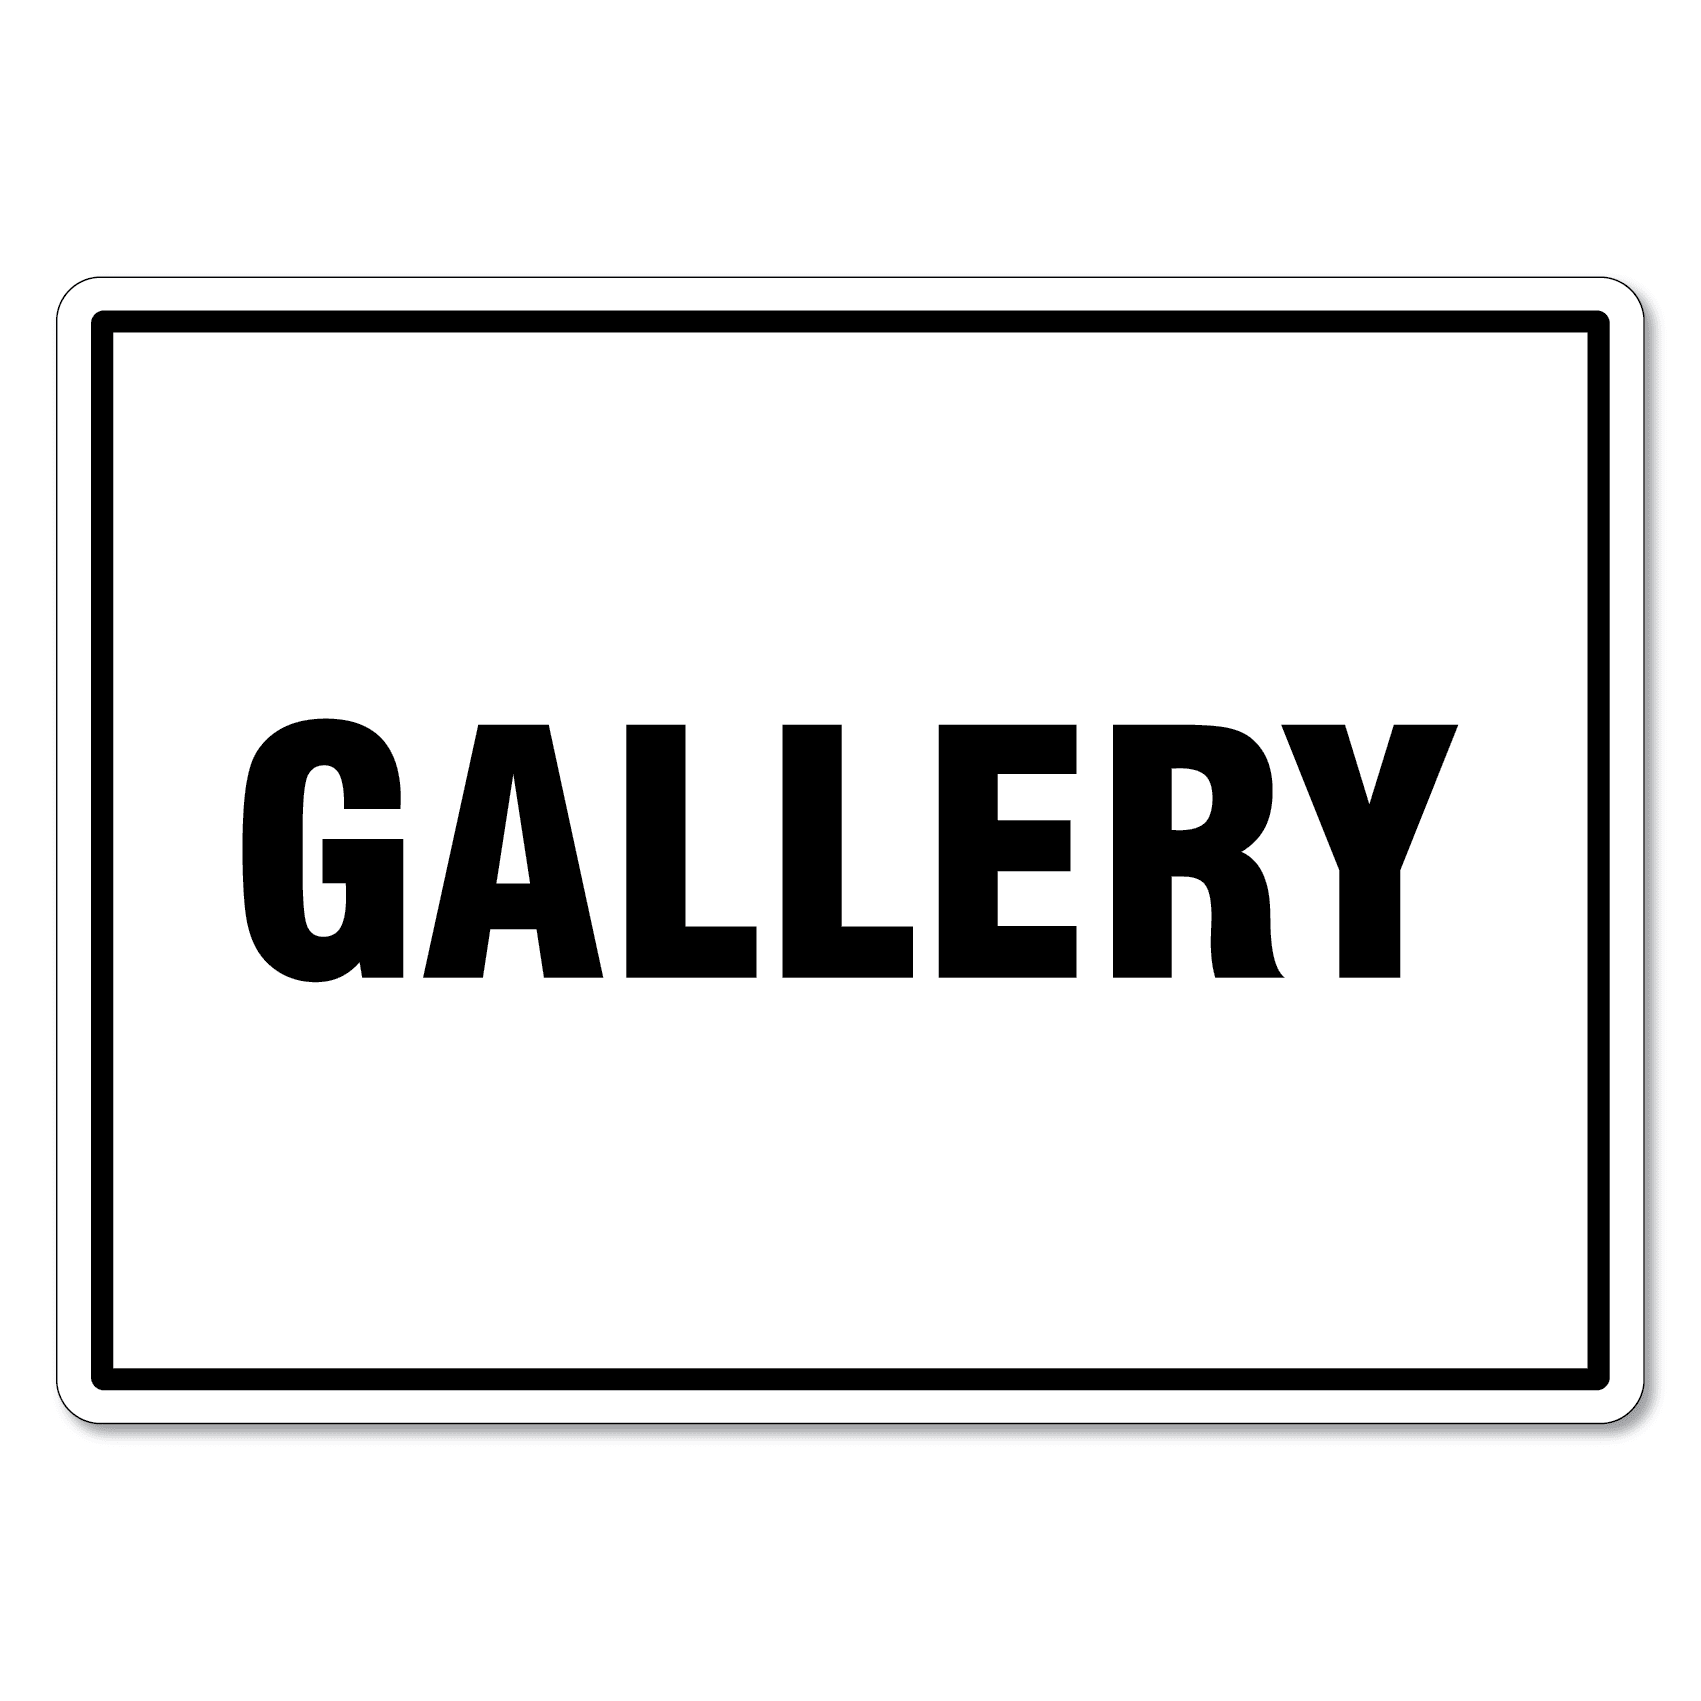 Gallery Sign - The Signmaker